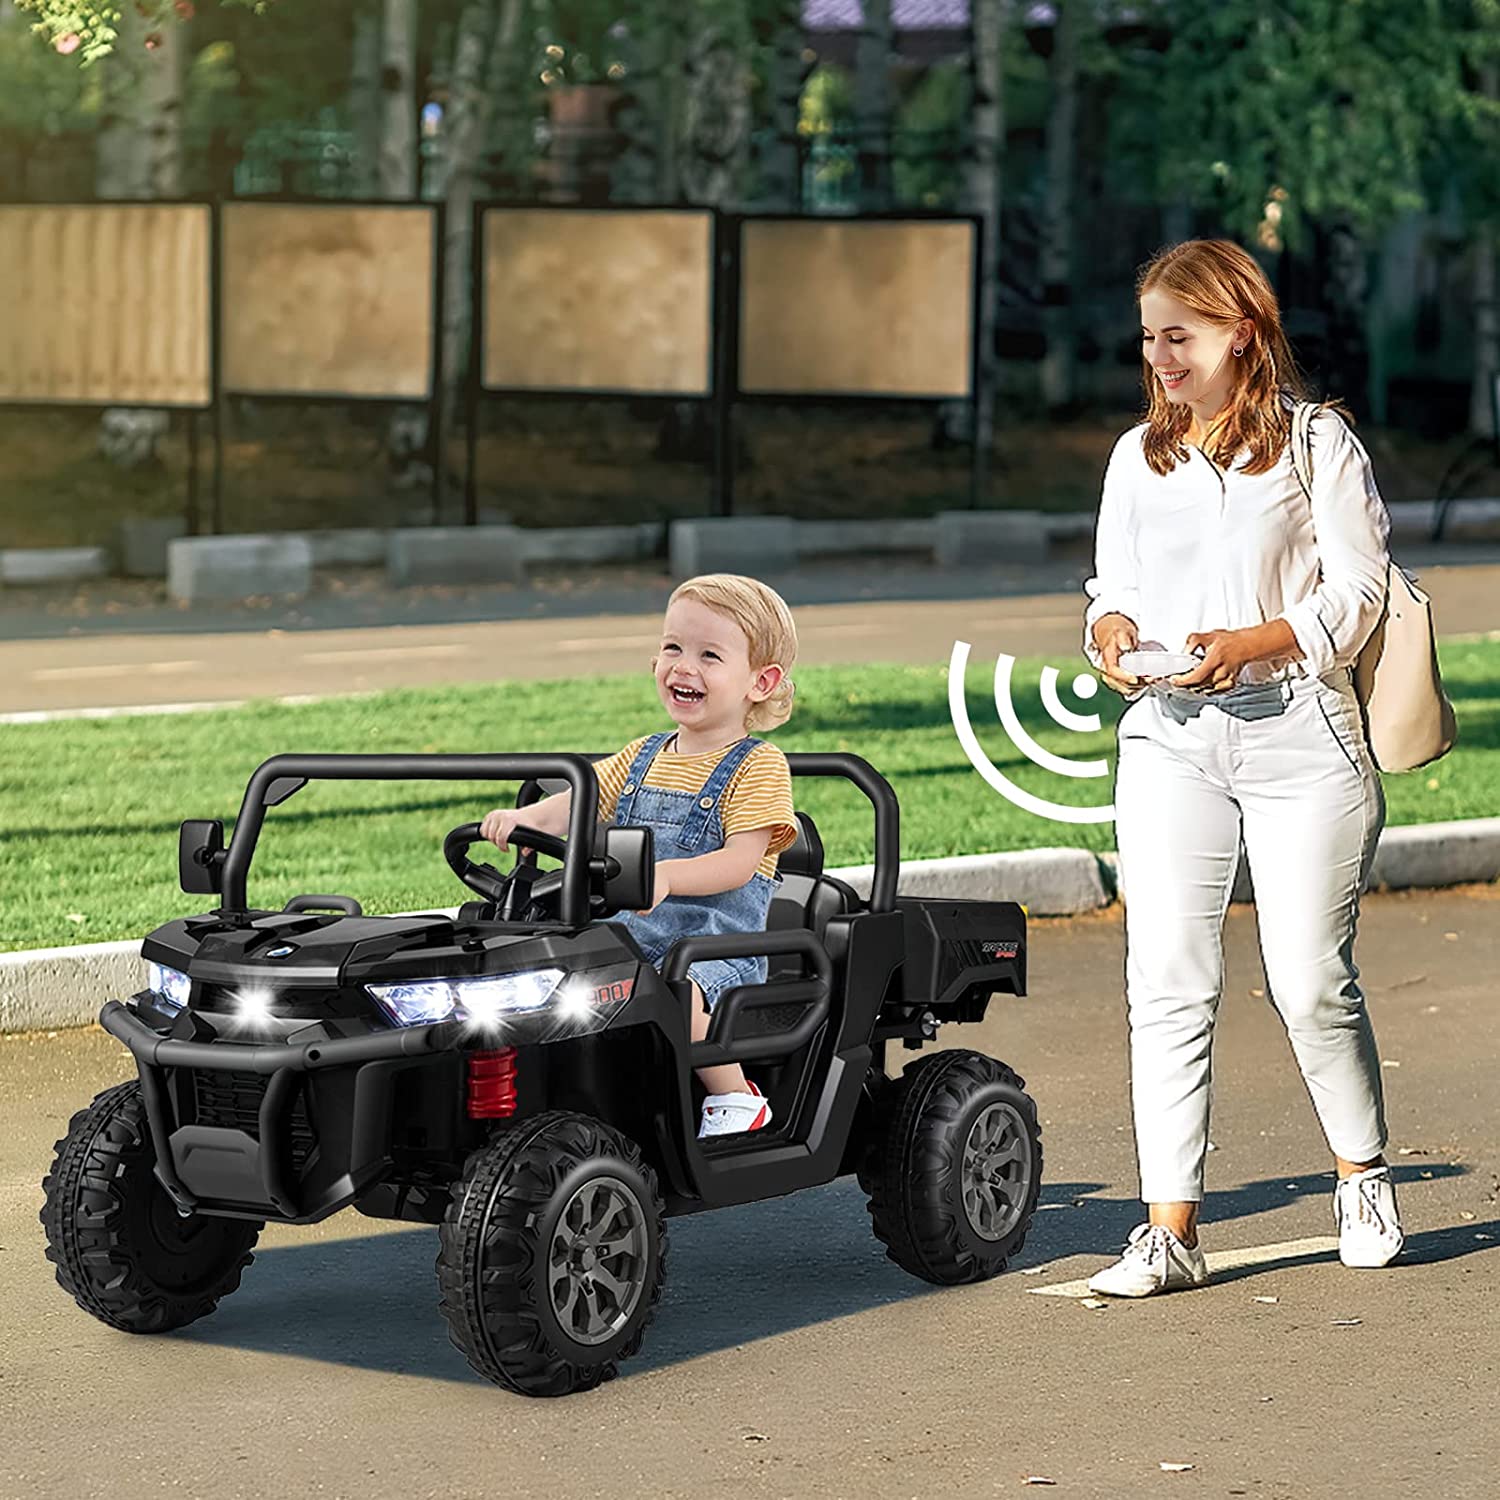 Chairliving 12V 2-Seater Ride On Car Electric Dump Truck Kids UTV Car with Remote Control Electric Dump Bed Rocking Function